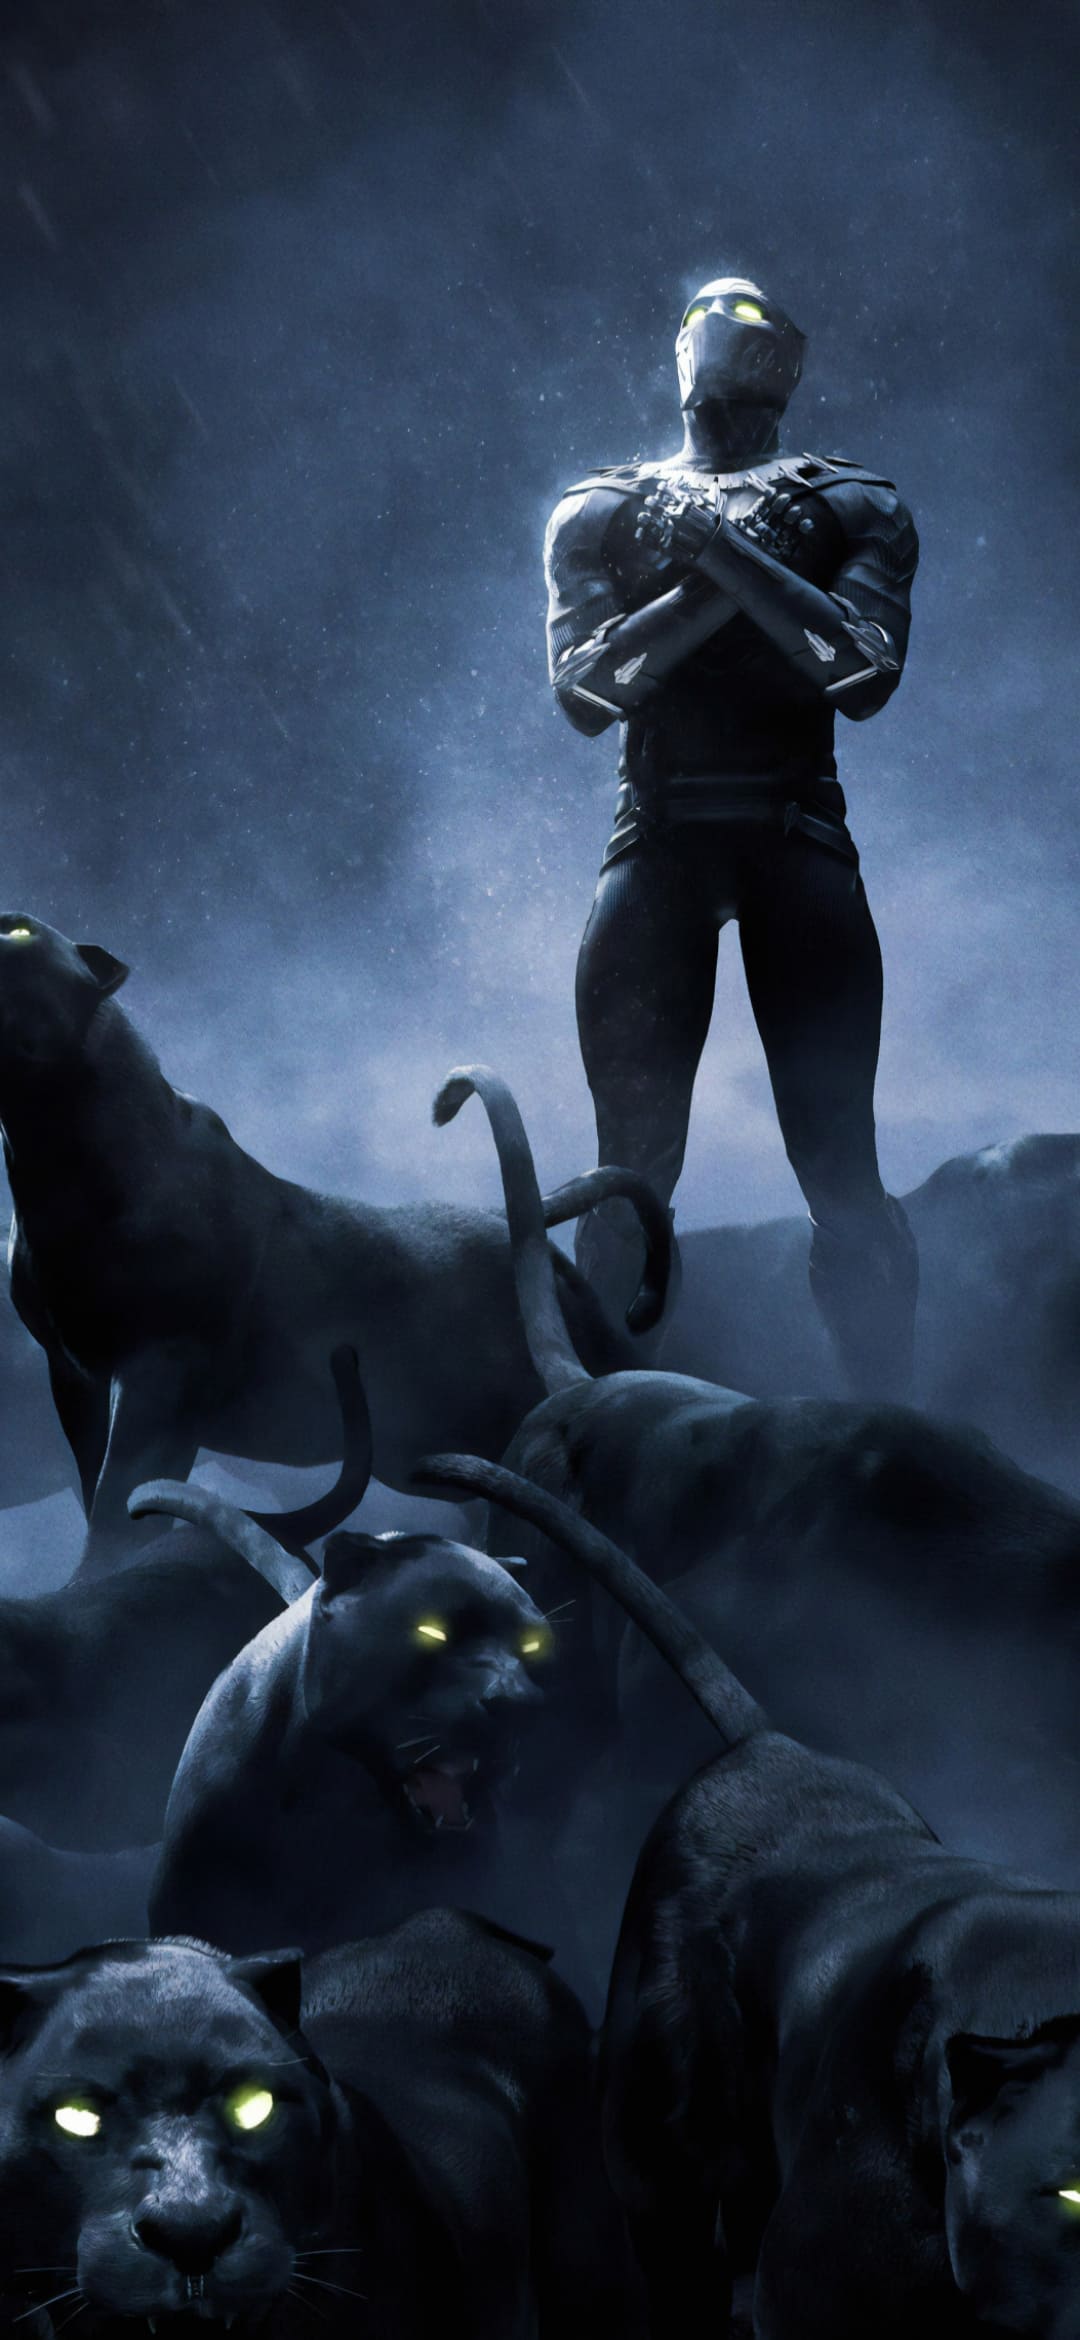 Black Panther Wallpaper For iPhone